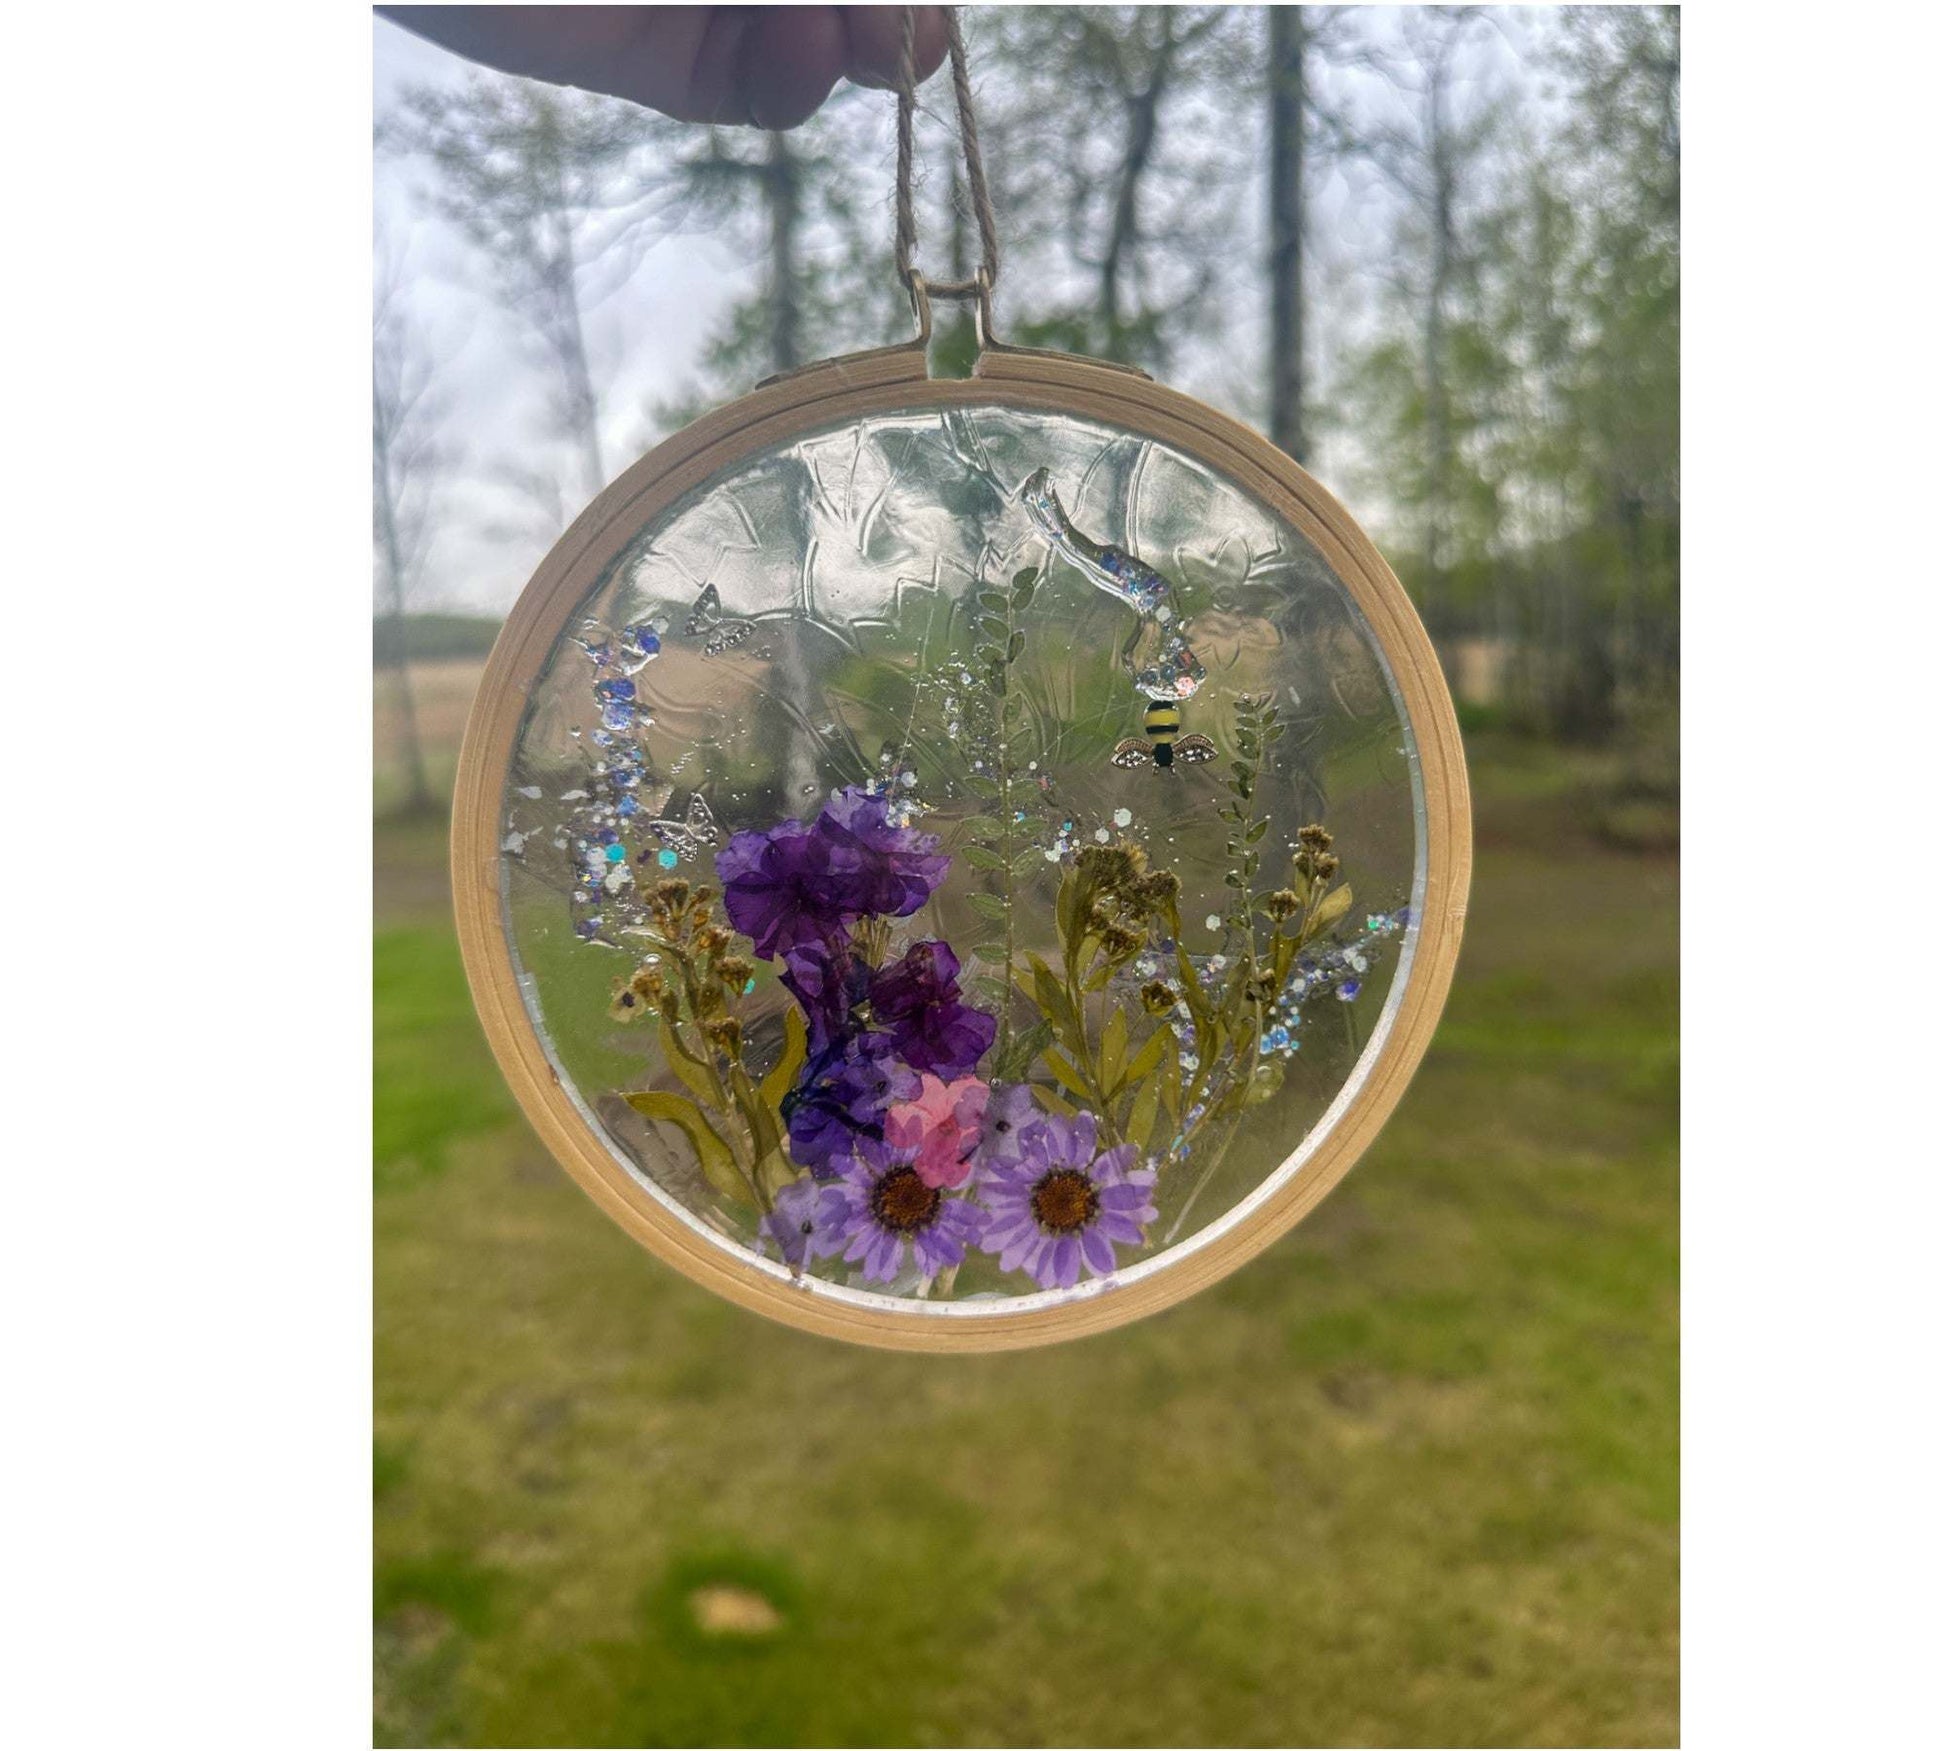 Whimsical Glow-in-the-Dark Floral Suncatcher with Real Pressed Flowers